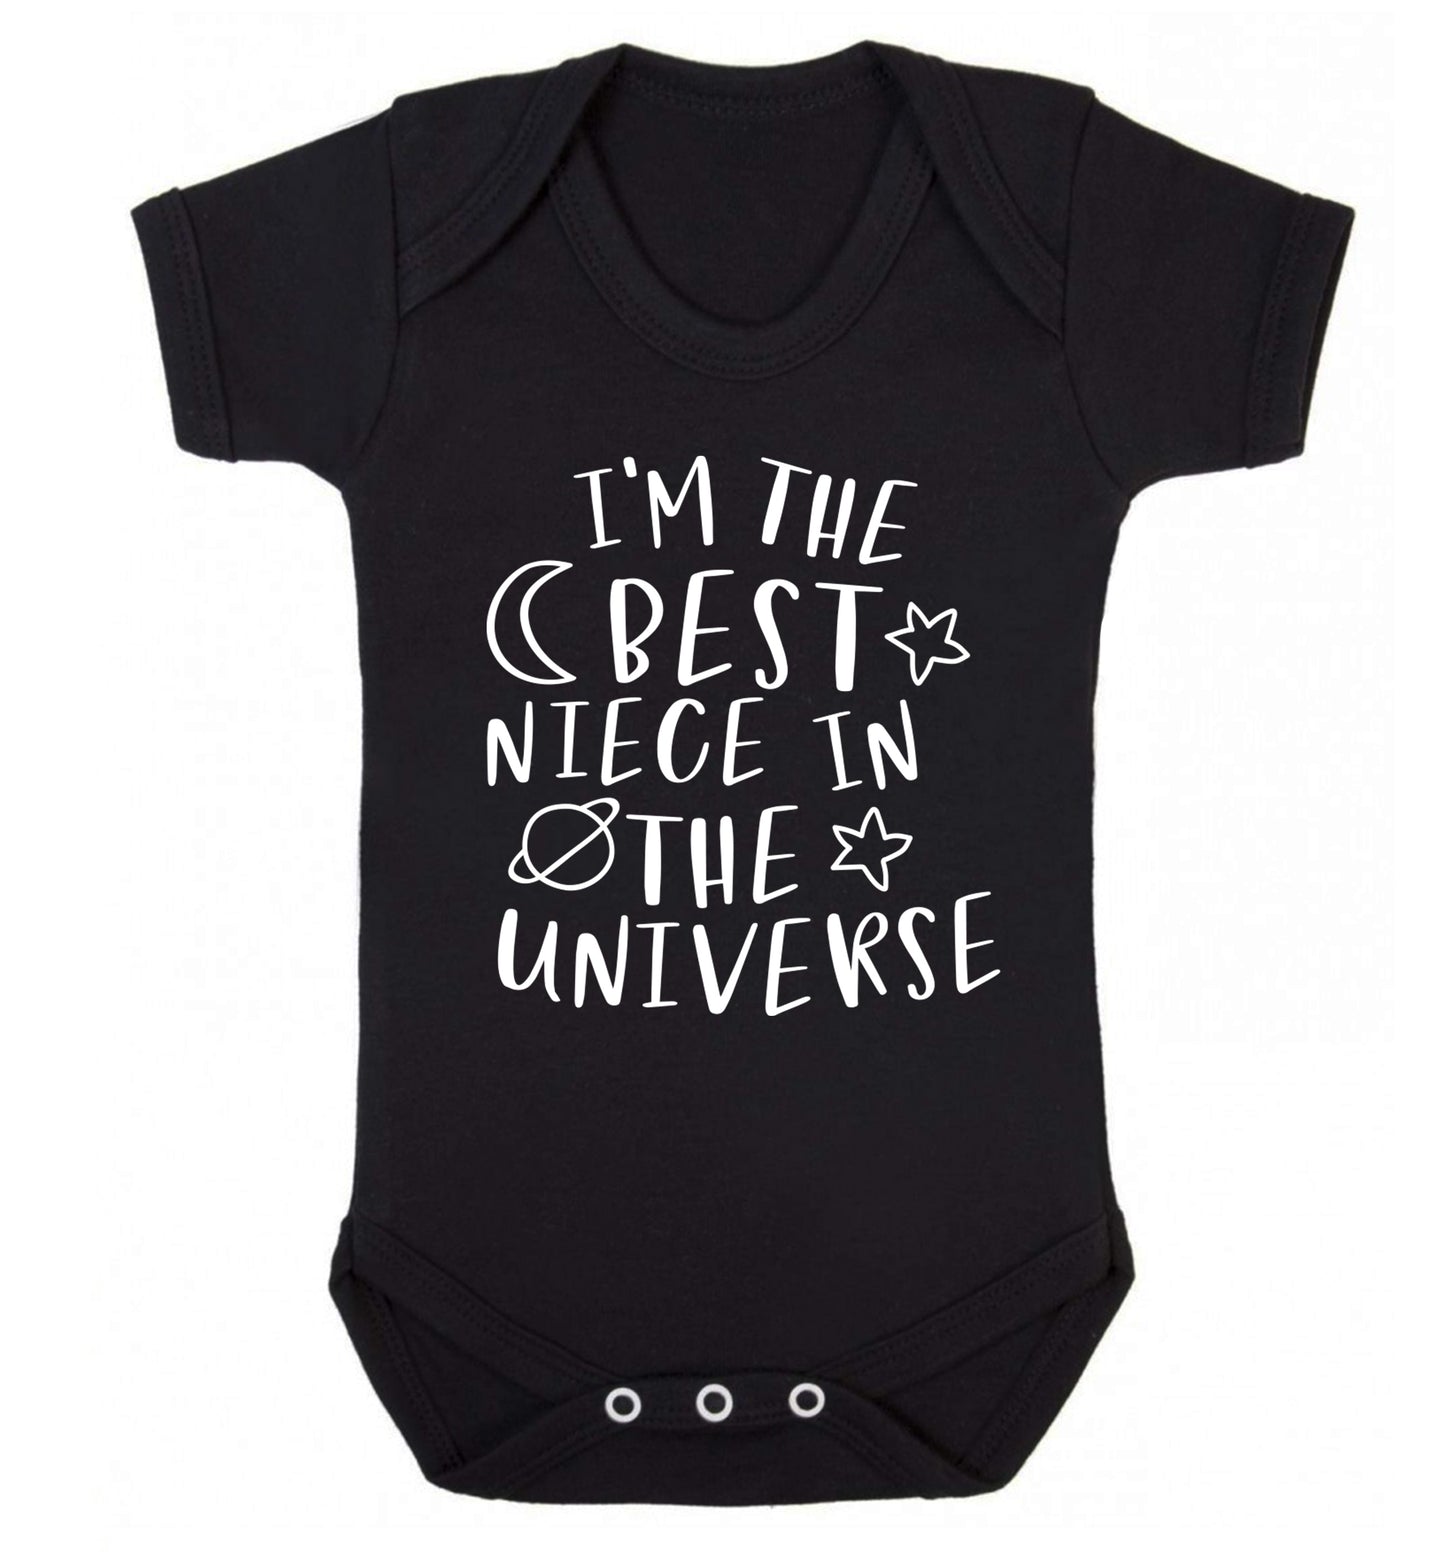 I'm the best niece in the universe Baby Vest black 18-24 months